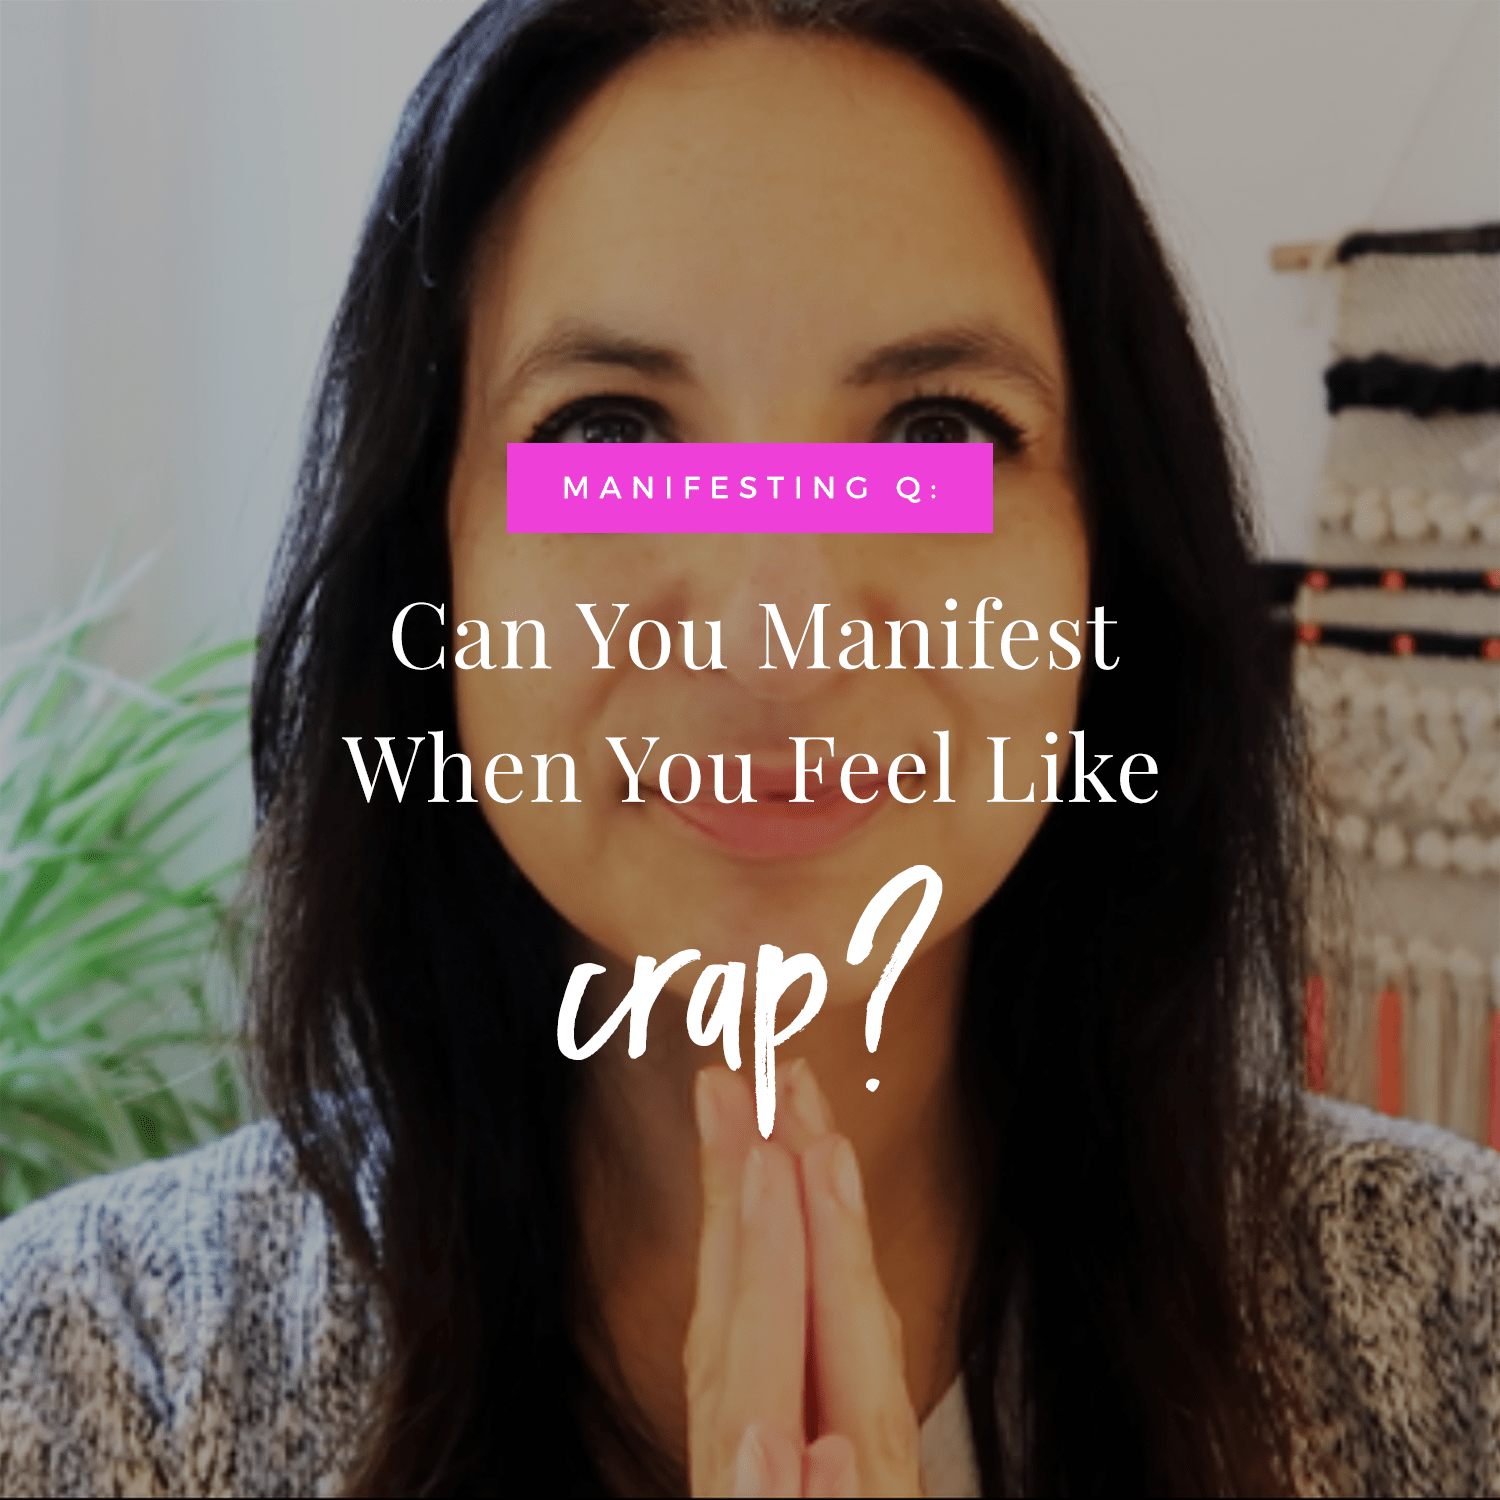 Can You Manifest When You Feel Like Crap?